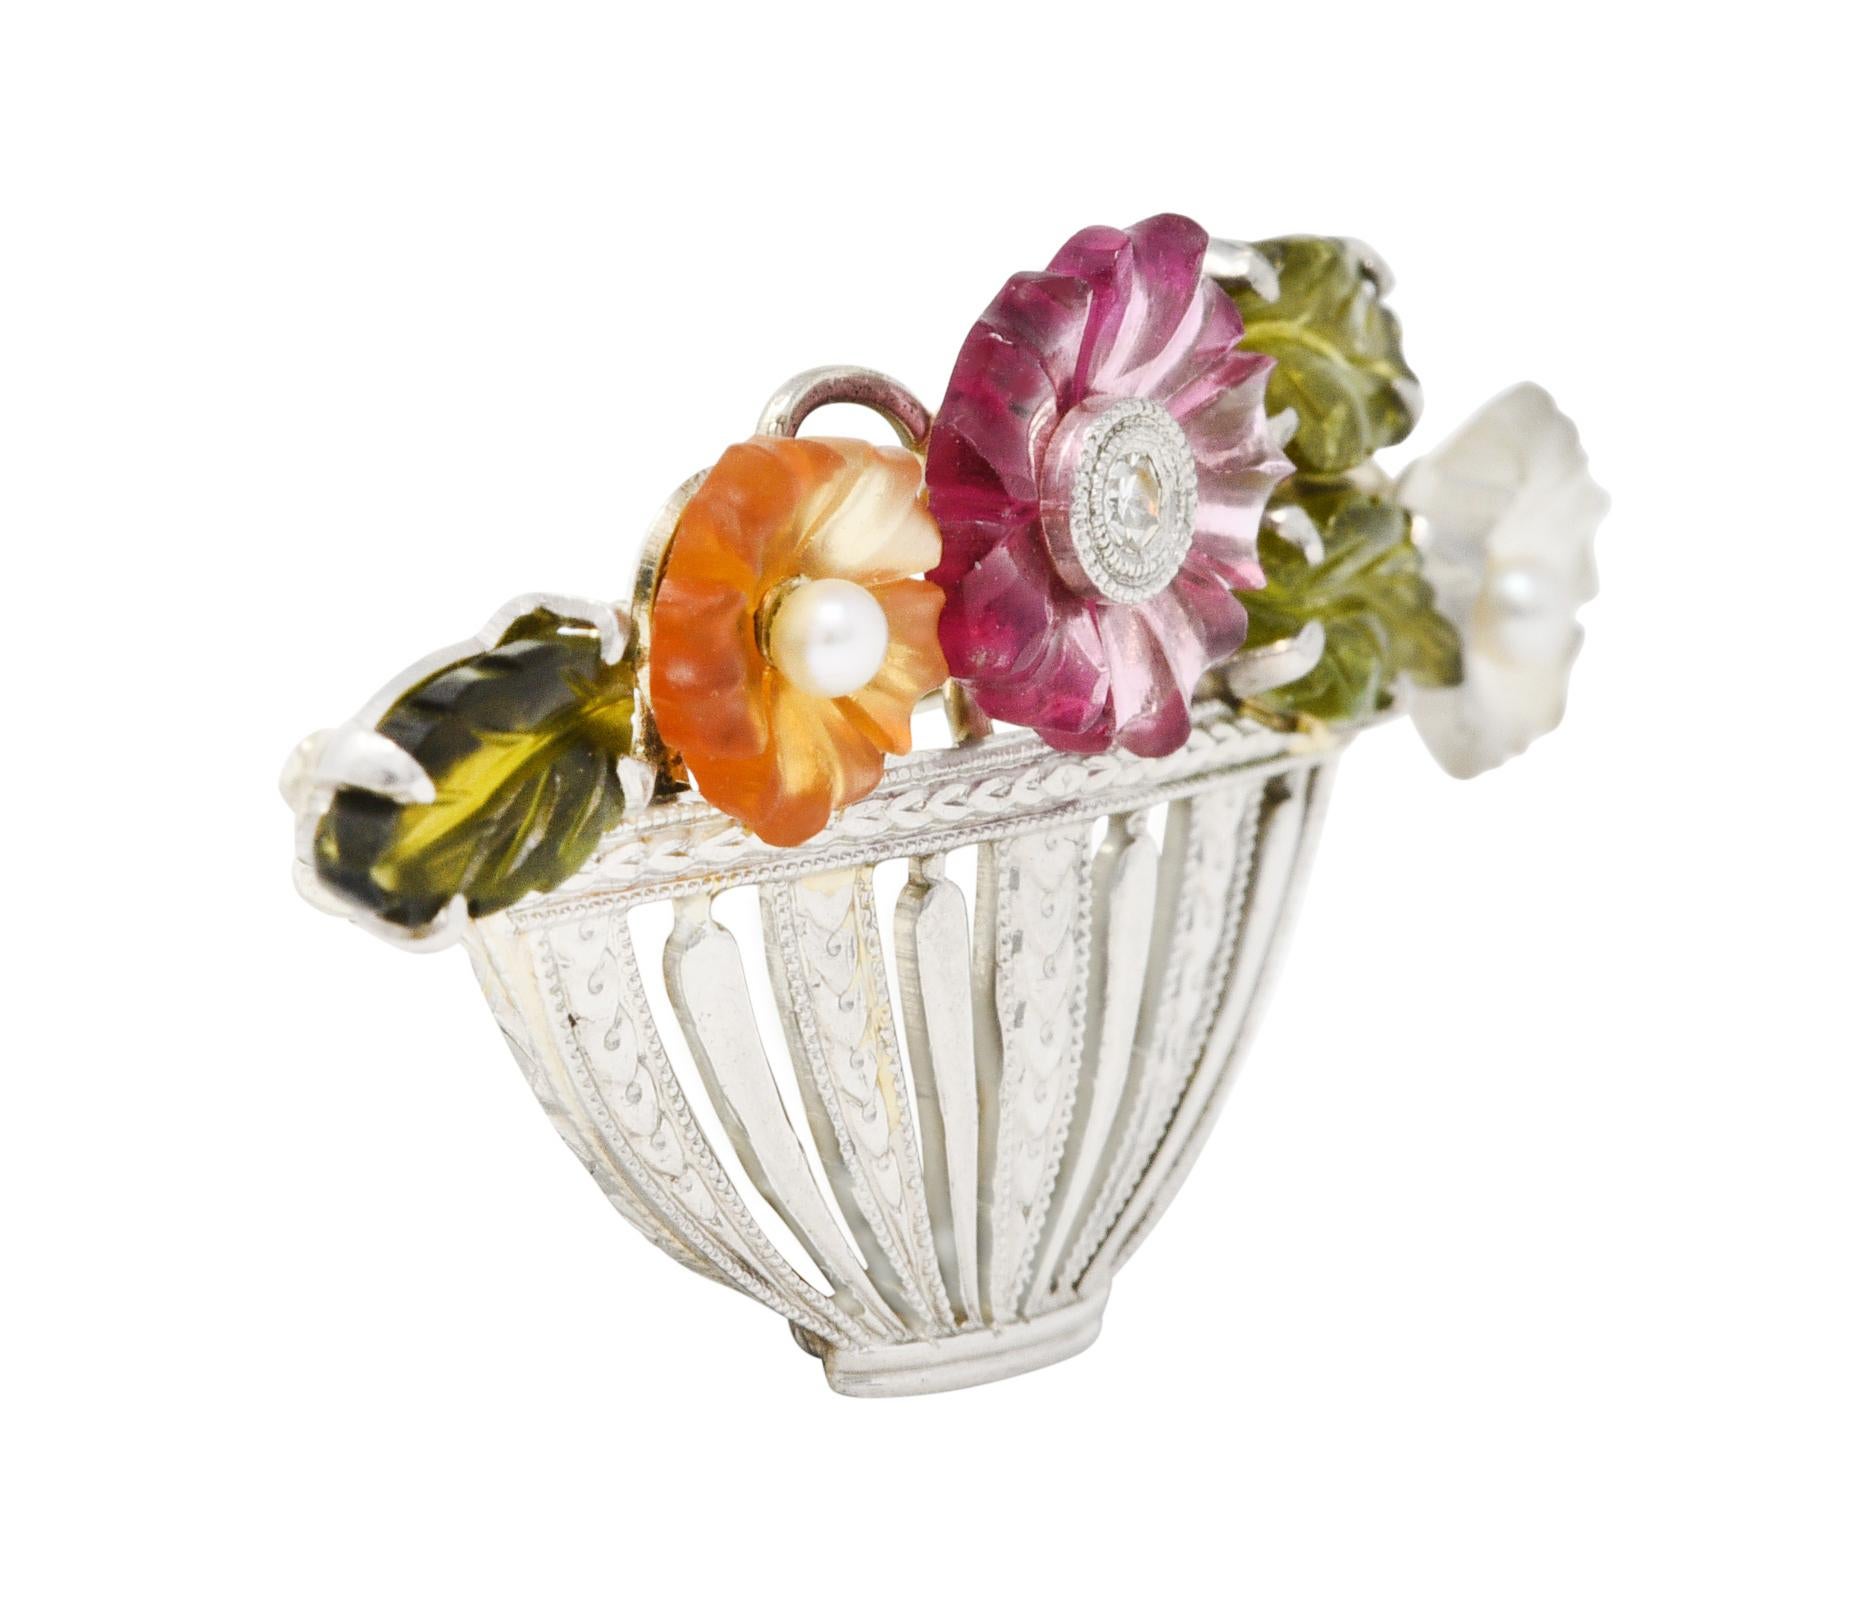 Giardinetto brooch is designed as a pierced bowl-like vase full of carved gemstone florals

Bowl is pierced and striated with a hand engraved wheat motif

With carved tourmaline leaves - very well matched olive green in color

Centering a purplish